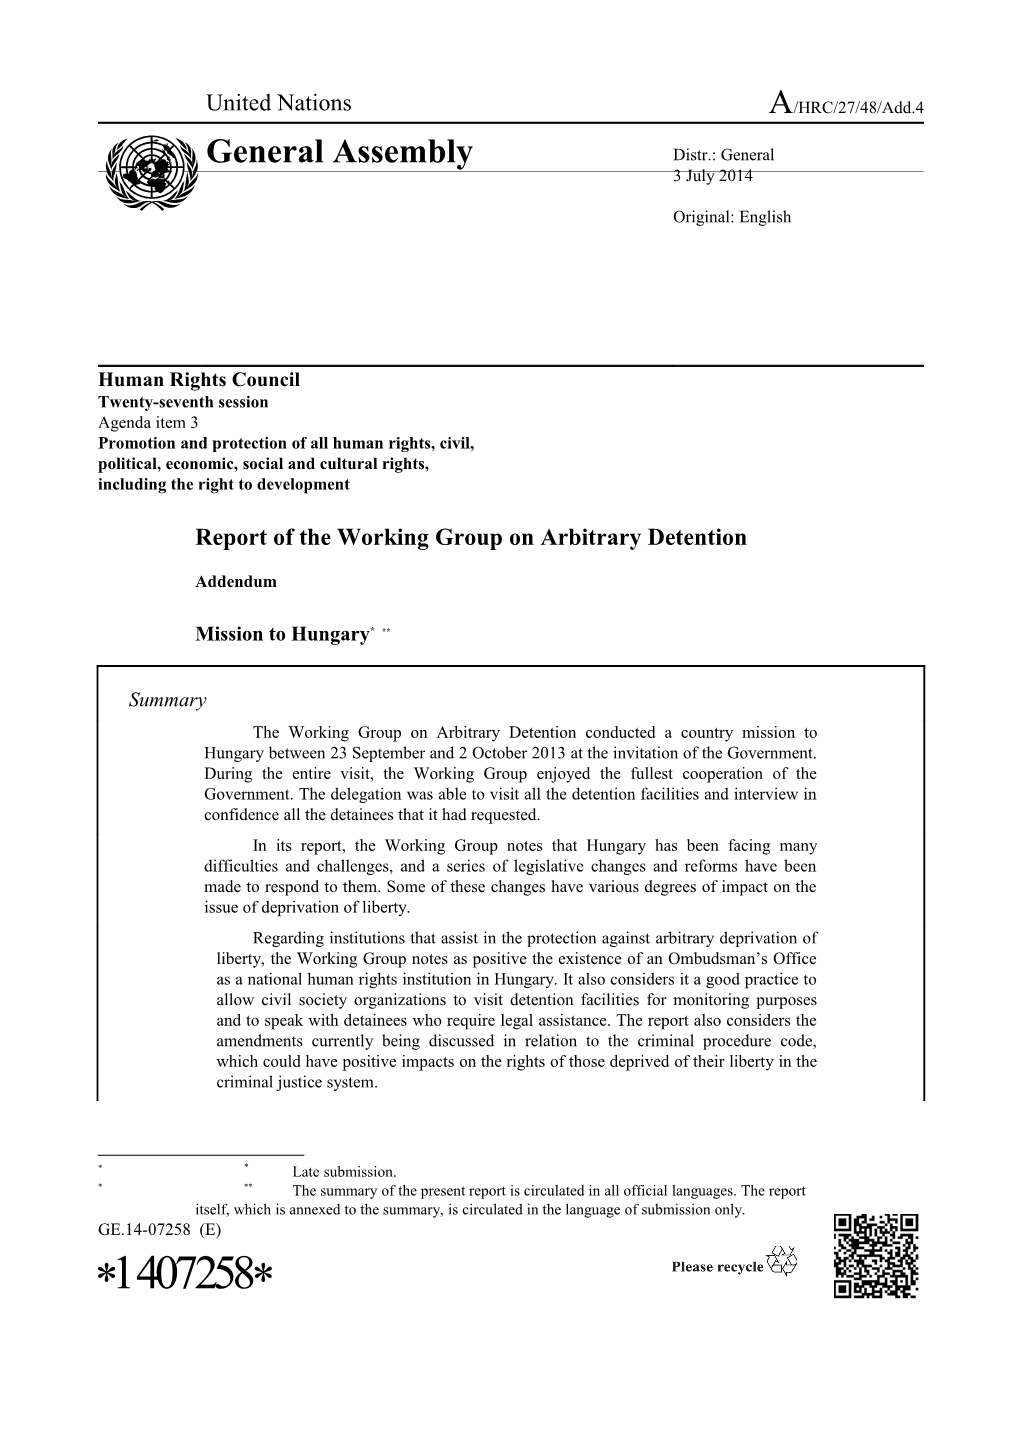 Report of the Working Group on Arbitrary Detention - Mission to Hungary in English